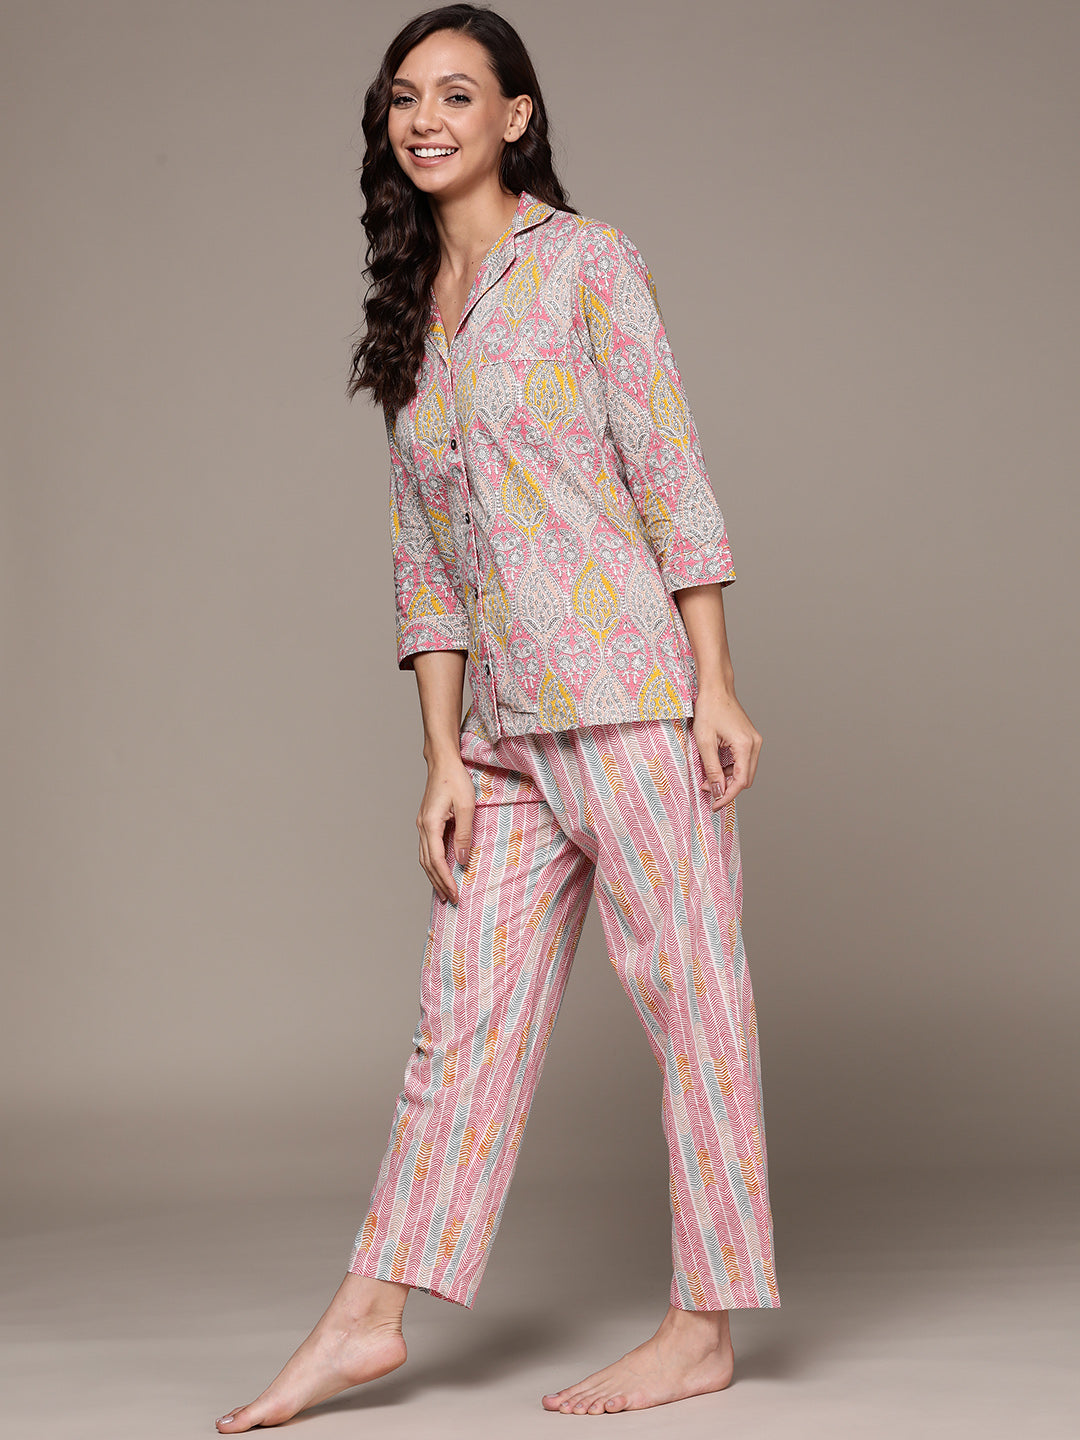 Women's's Pink & Yellow Ethnic Motifs Printed Pure Cotton Night Suit